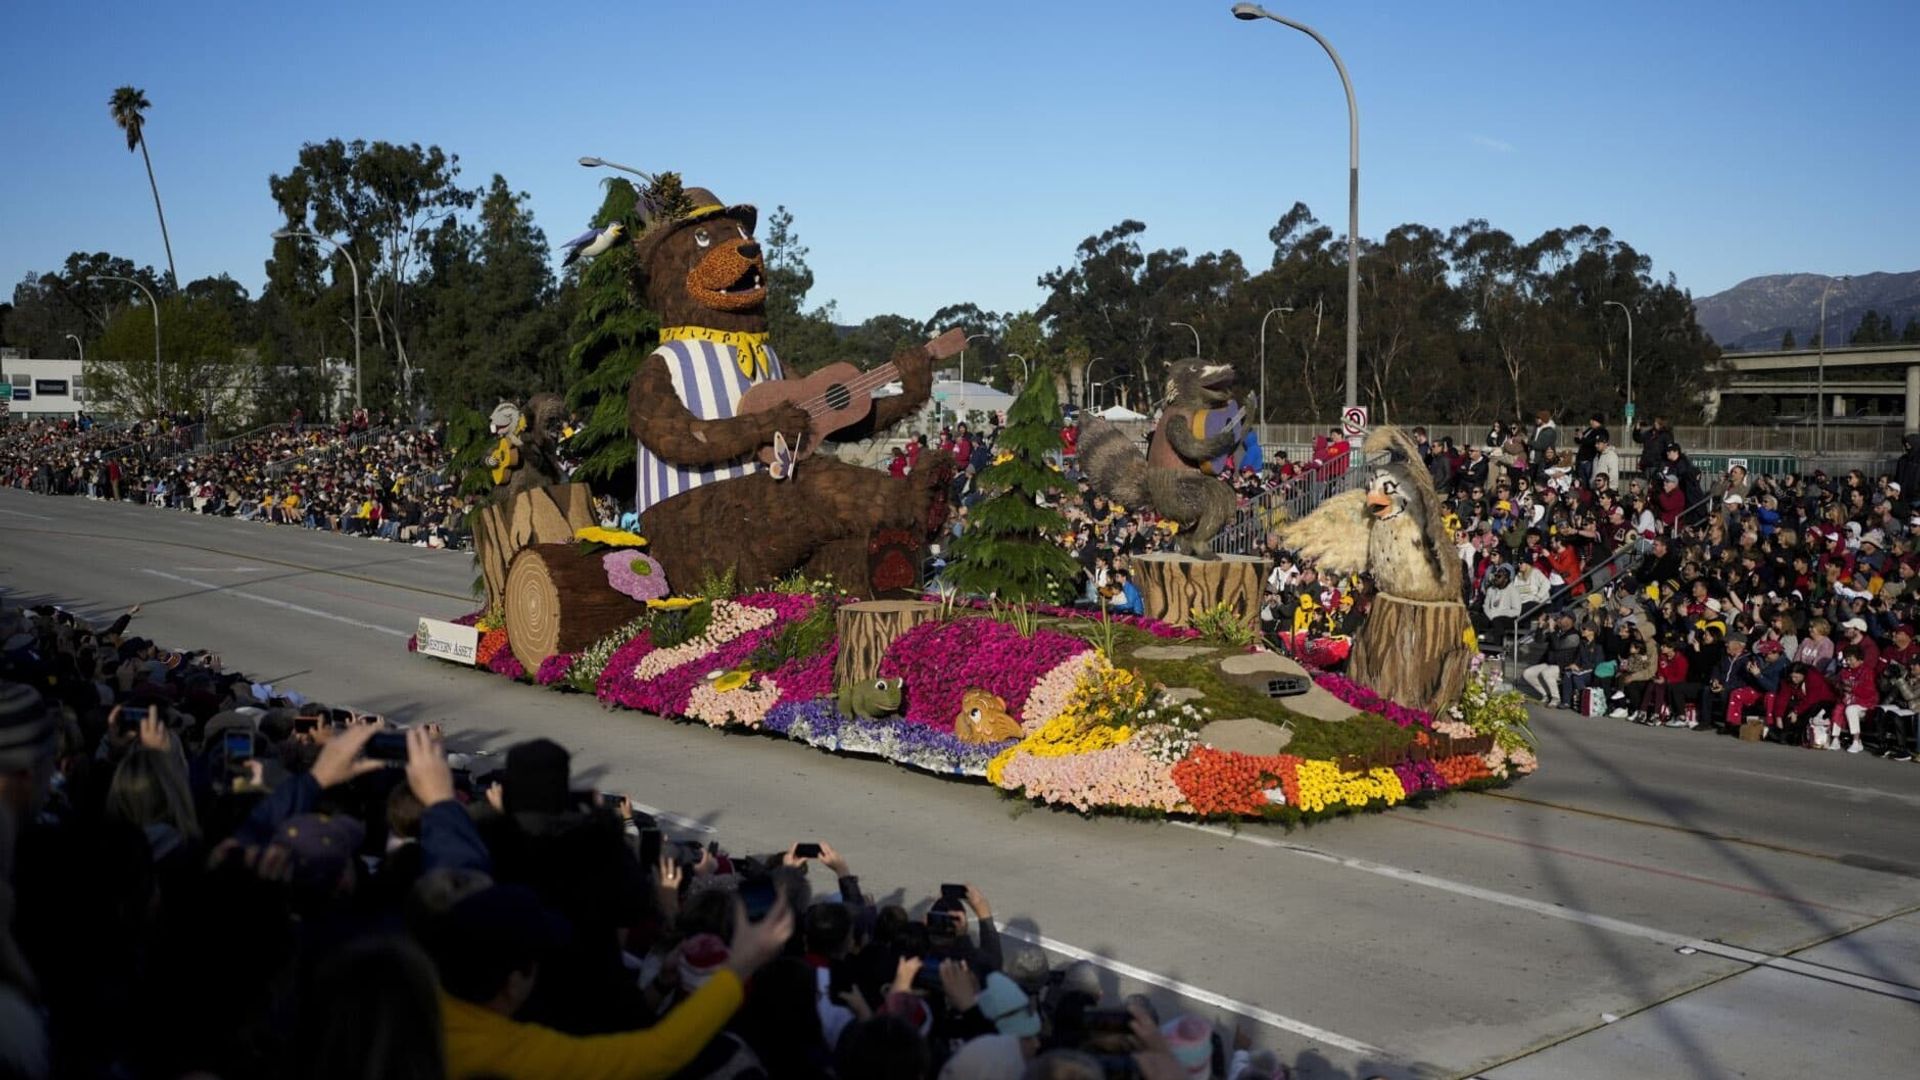 The 135th Rose Parade presented by Honda background